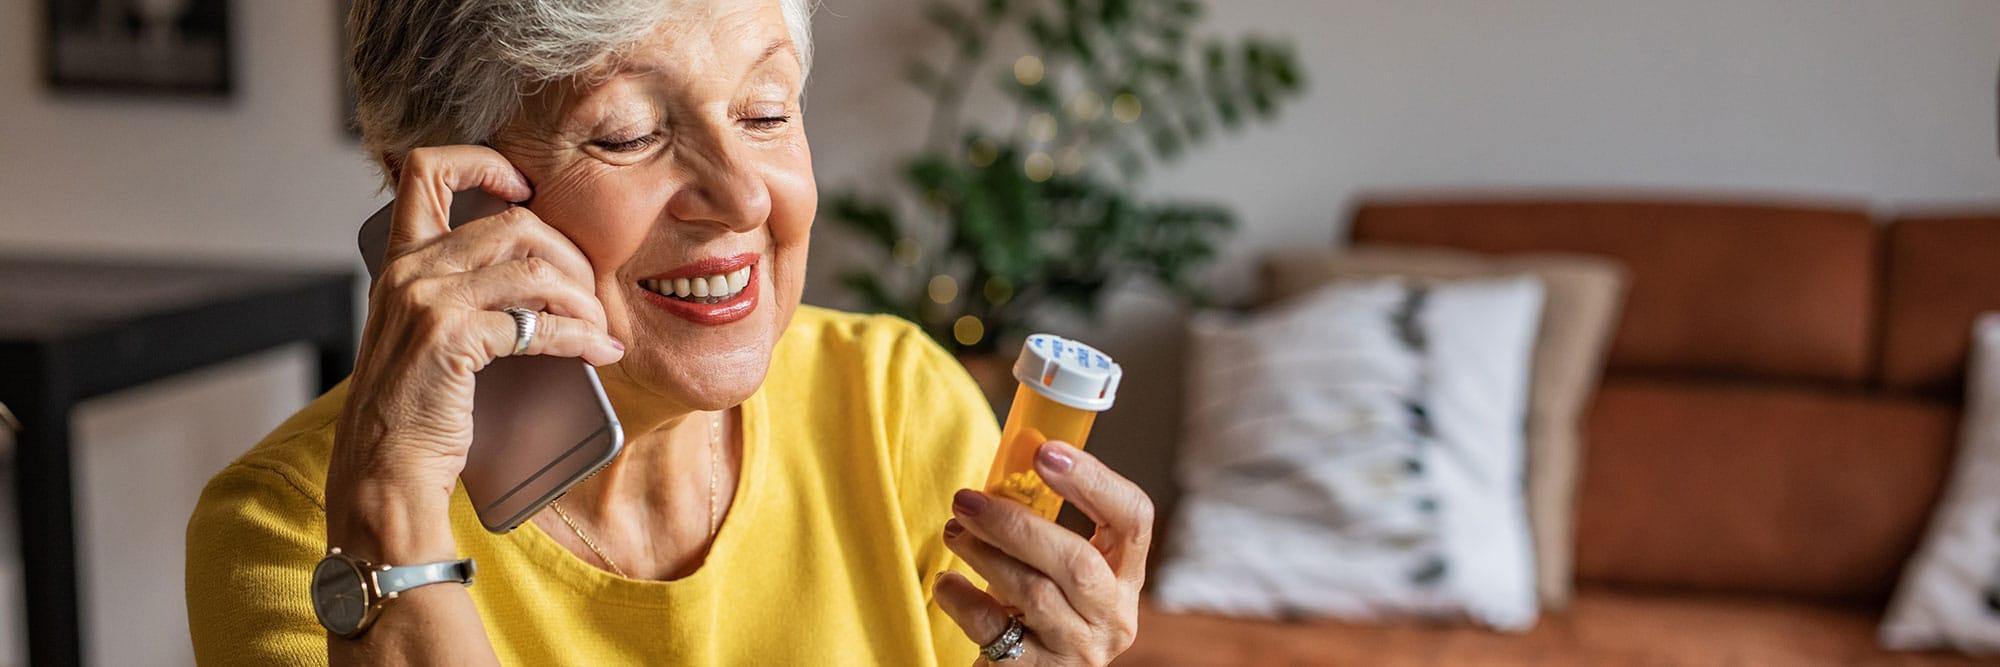 Older woman on phone asking question about prescription